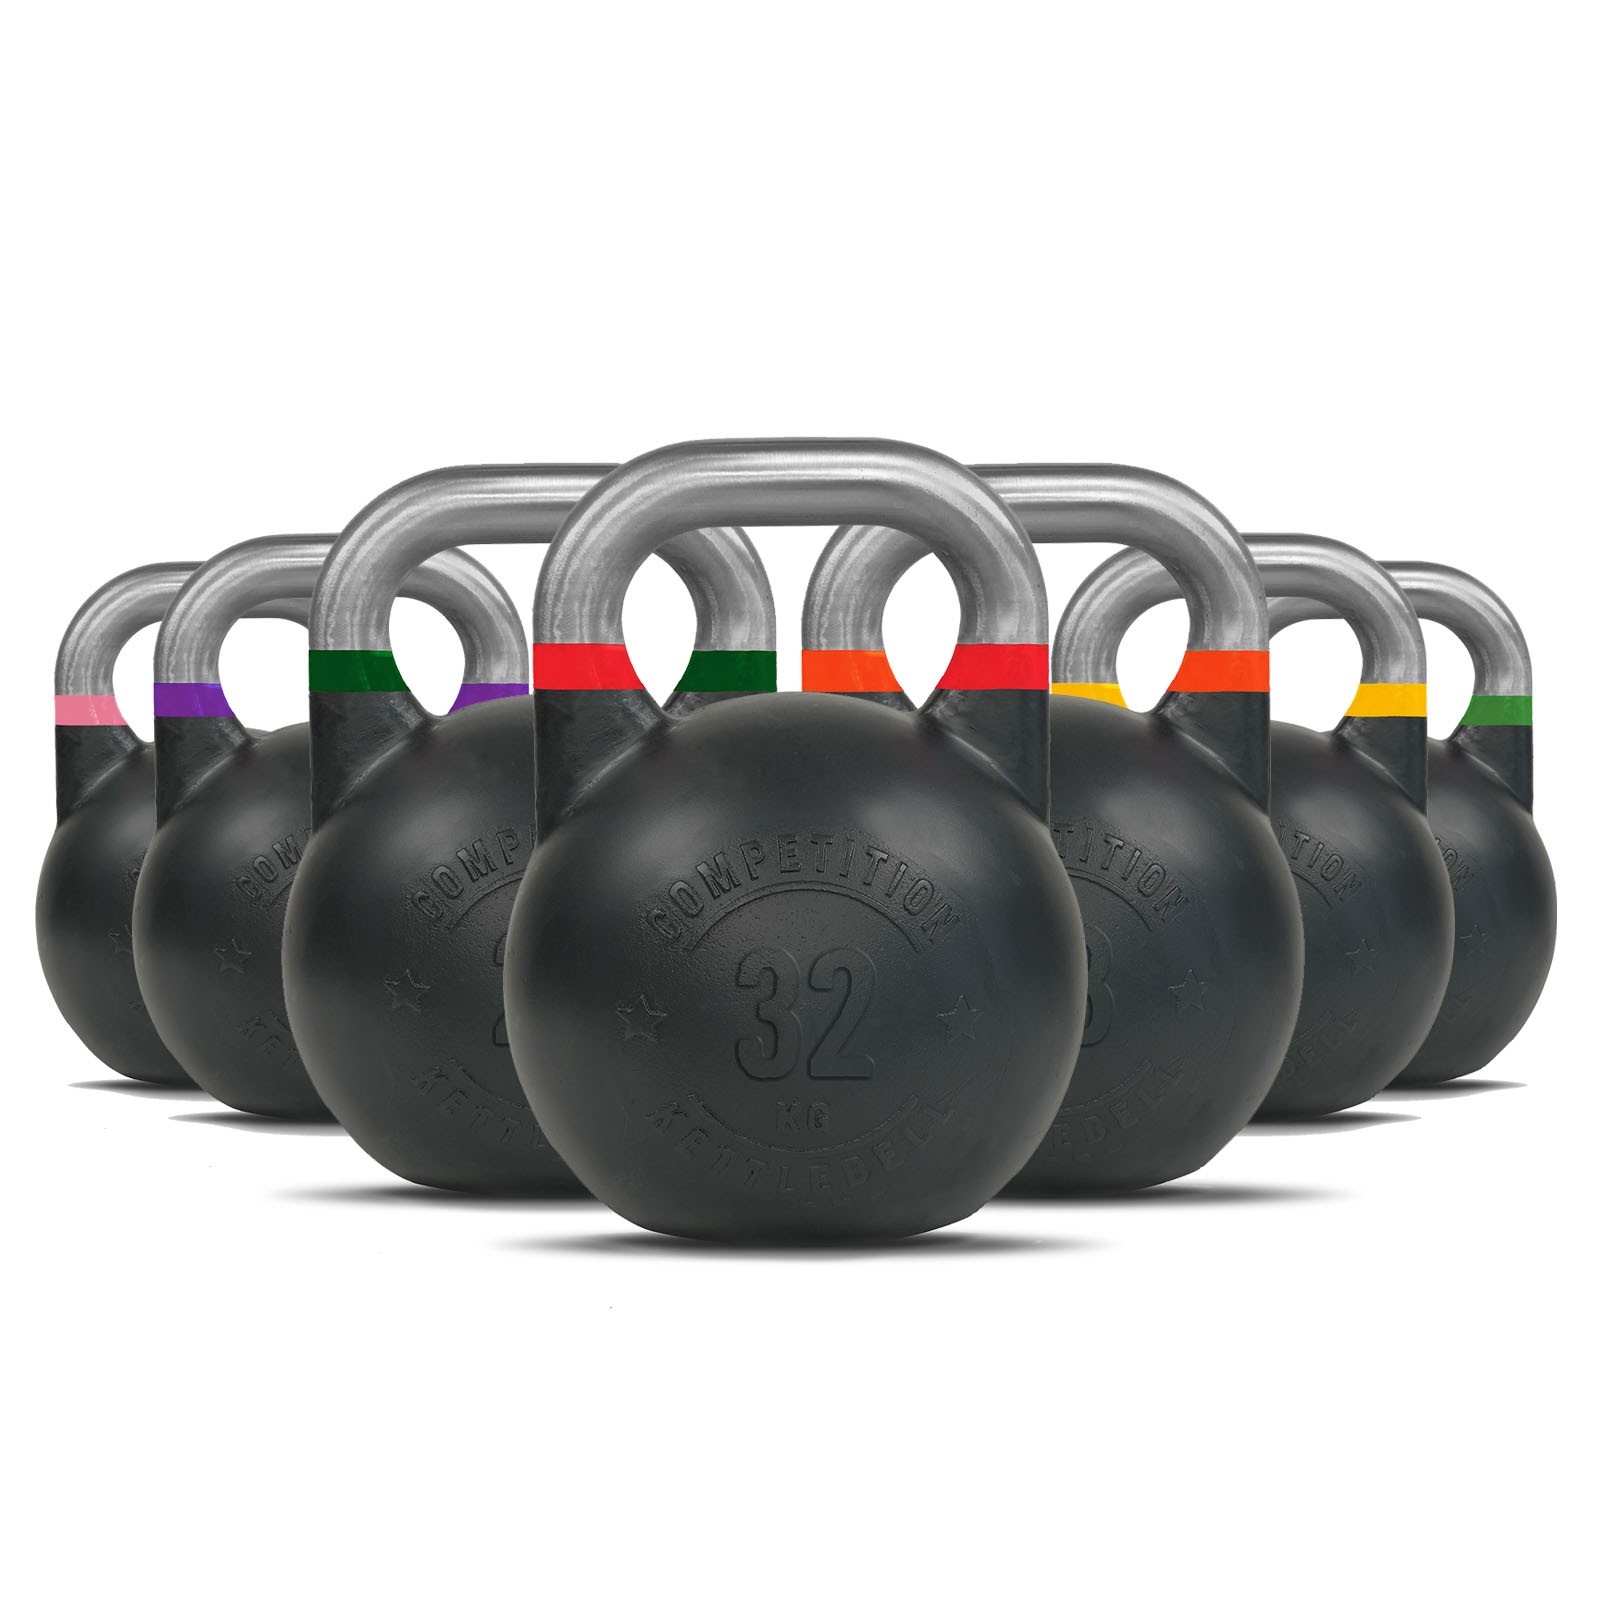 The main role of the 8kg competition kettlebells in the exercise.